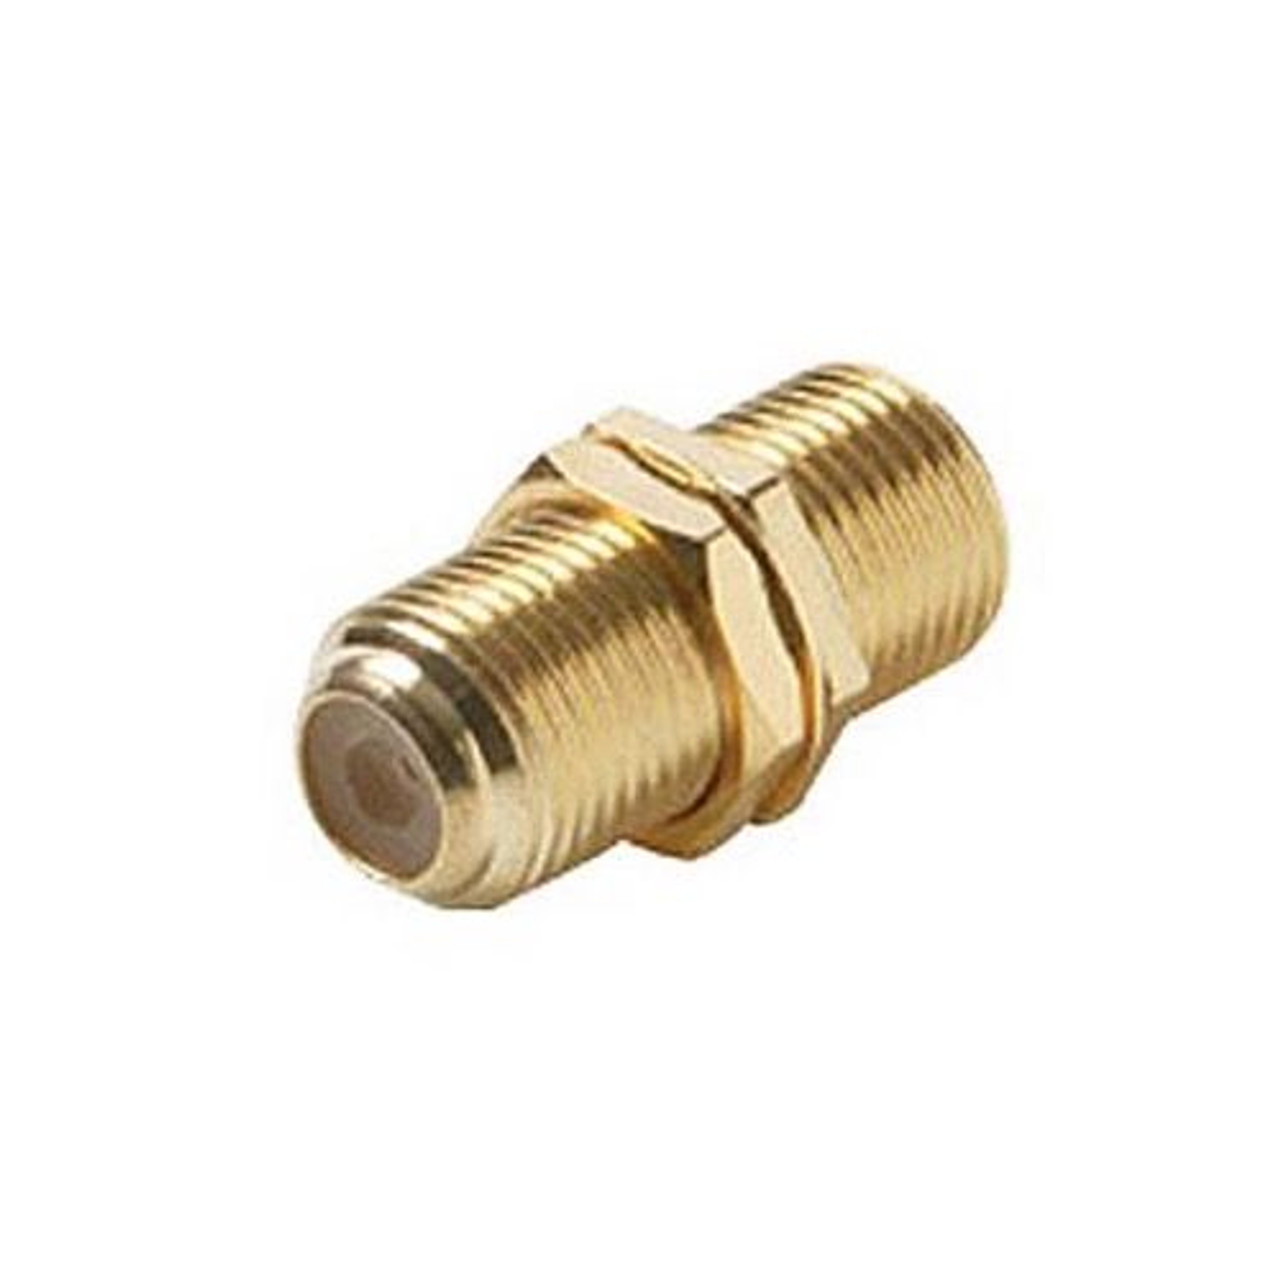 Steren 251-503 Single F Type Barrel Coupler Gold Plate F-81 F to F Female Connector Wall Plate Use Barrel 1 Pack Jack Splice Connector Adapter Jointer Coupling Audio Video Coaxial Cable Plug Extension